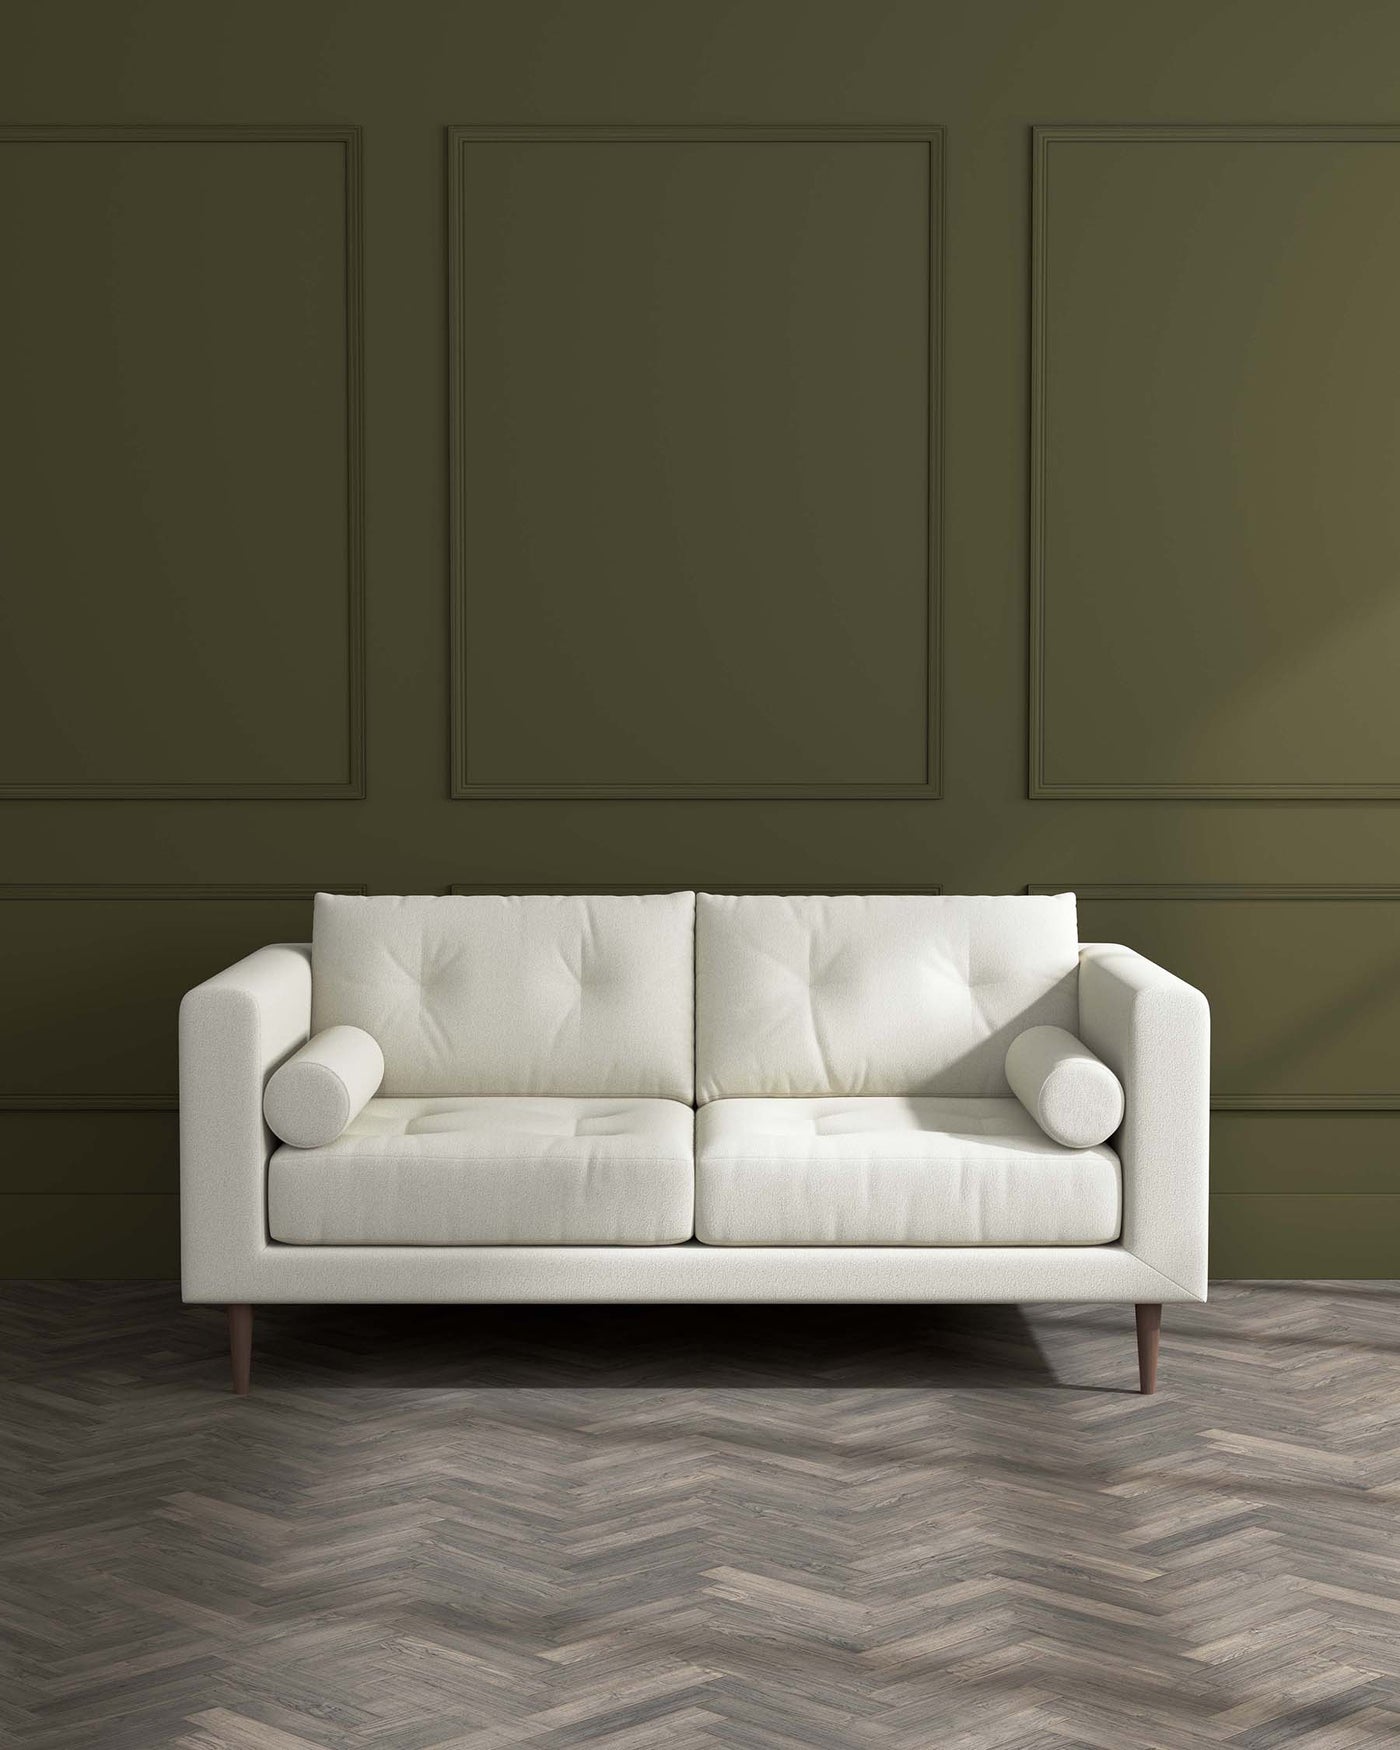 Elegant three-seater sofa with a minimalist design and light beige upholstery, featuring tufted back cushions, cylindrical side pillows, and tapered wooden legs against a muted green wall.